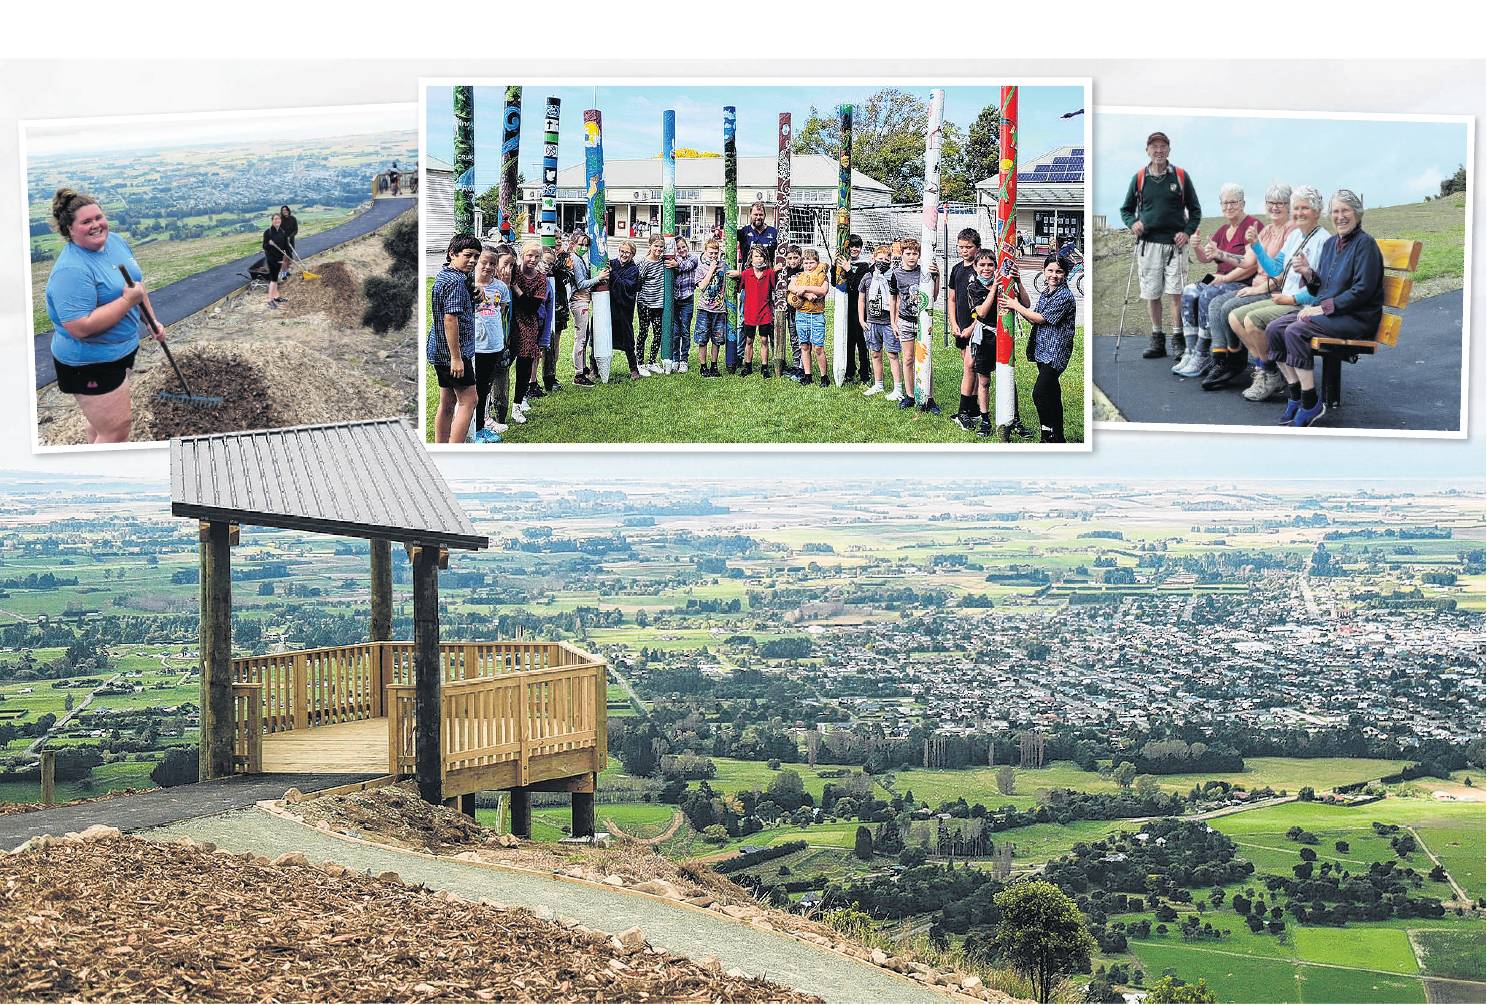 Waimate2gether’s project to restore the White Horse monument area —including the construction of new viewing platforms, toilets, a car parkingarea, landscaping, and new signs and information panels showcasing the history of the South Canterbury town — is 